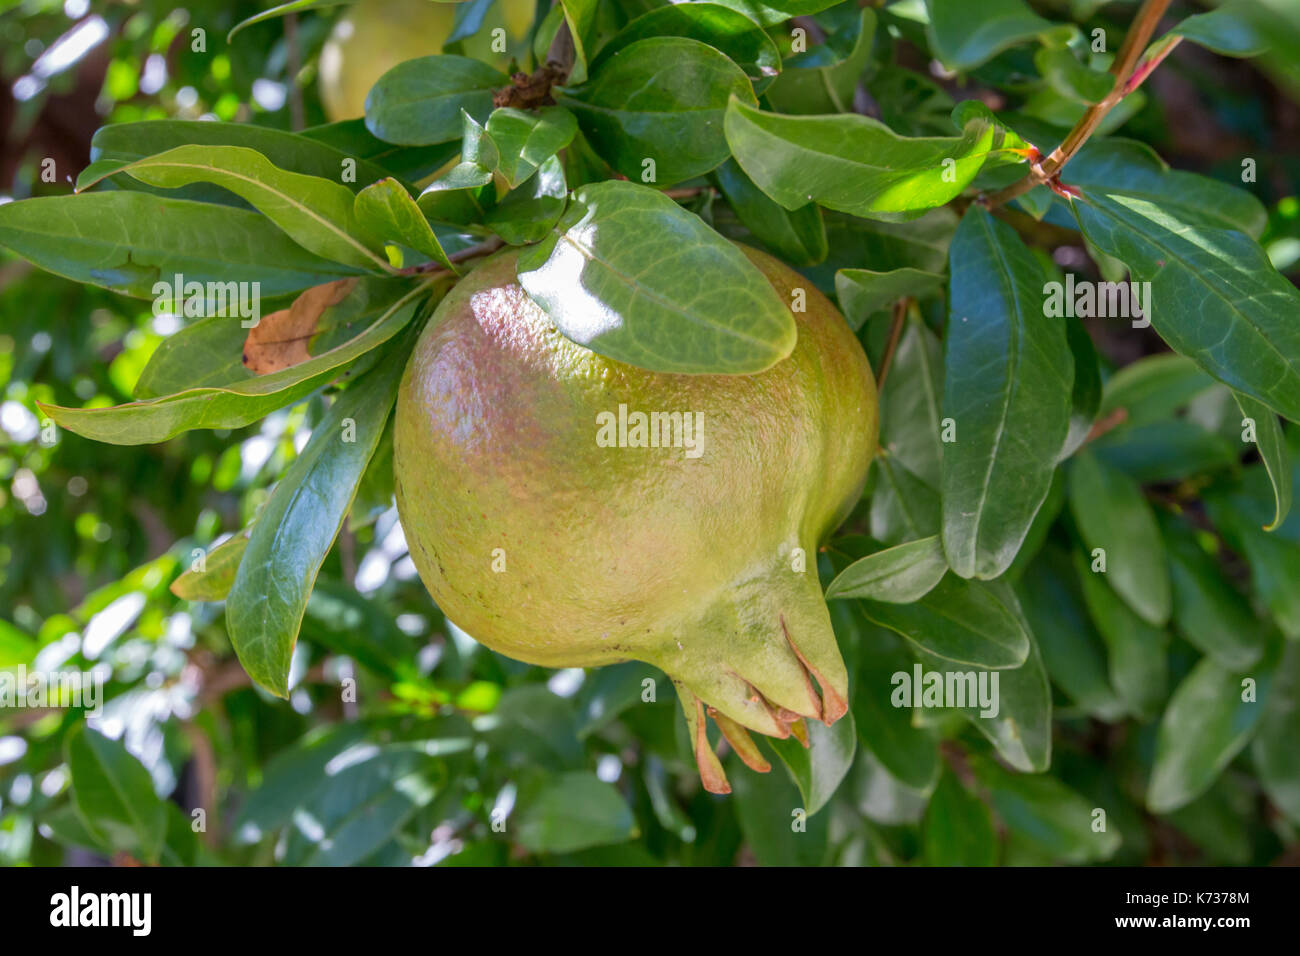 Pomegranate growing on a tree in Italy Stock Photo